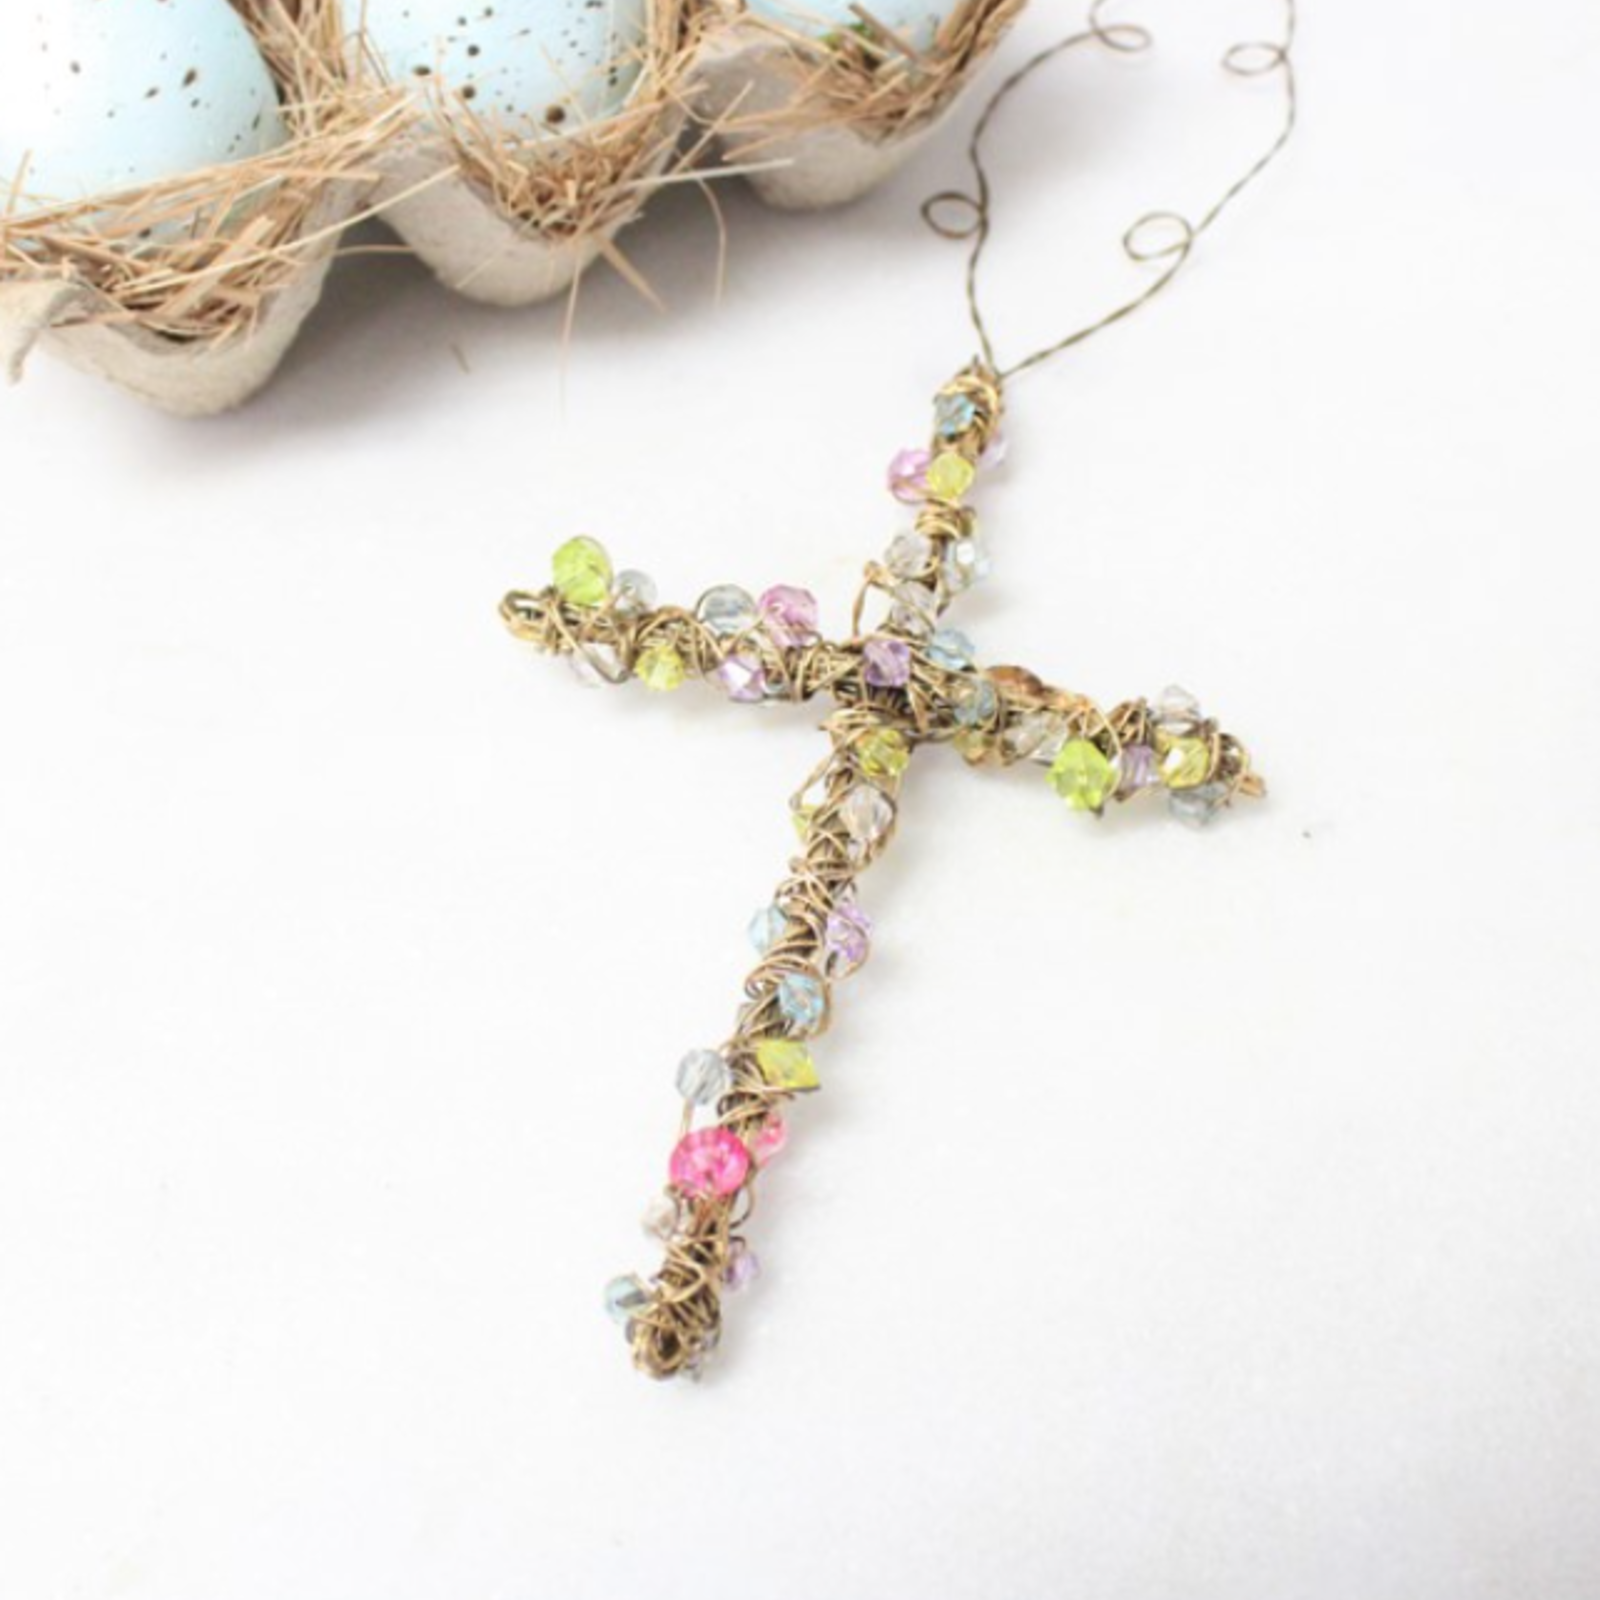 Trade Cie 6x4" Gold Wire Cross with Multicolor Beads JM92016 loading=